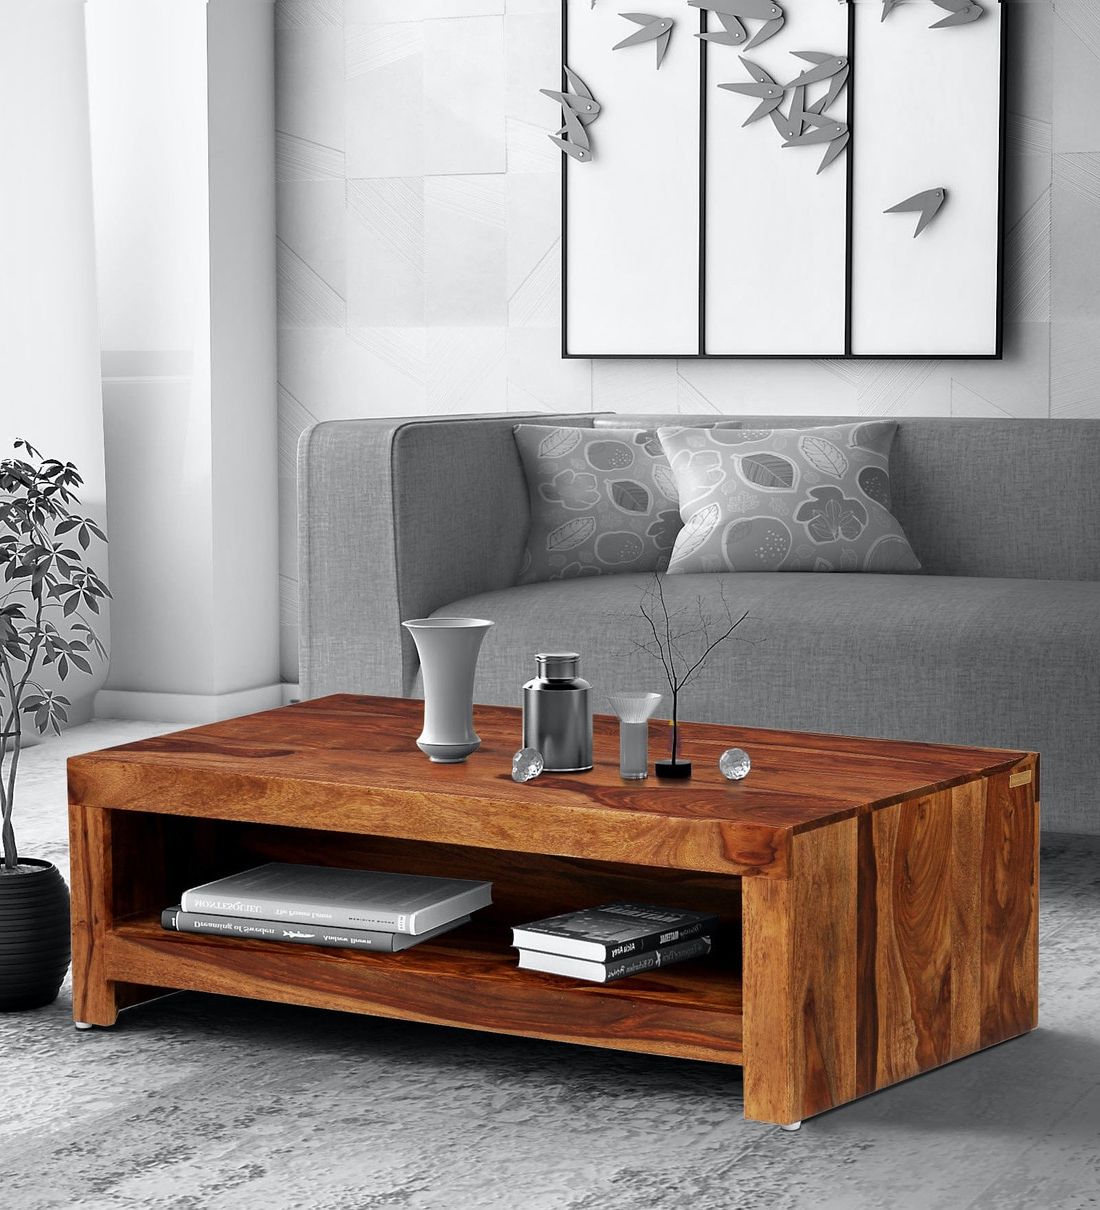 Buy Acropolis Solid Wood Coffee Table In Rustic Teak Finish Within Latest Modern Wooden X Design Coffee Tables (View 4 of 15)